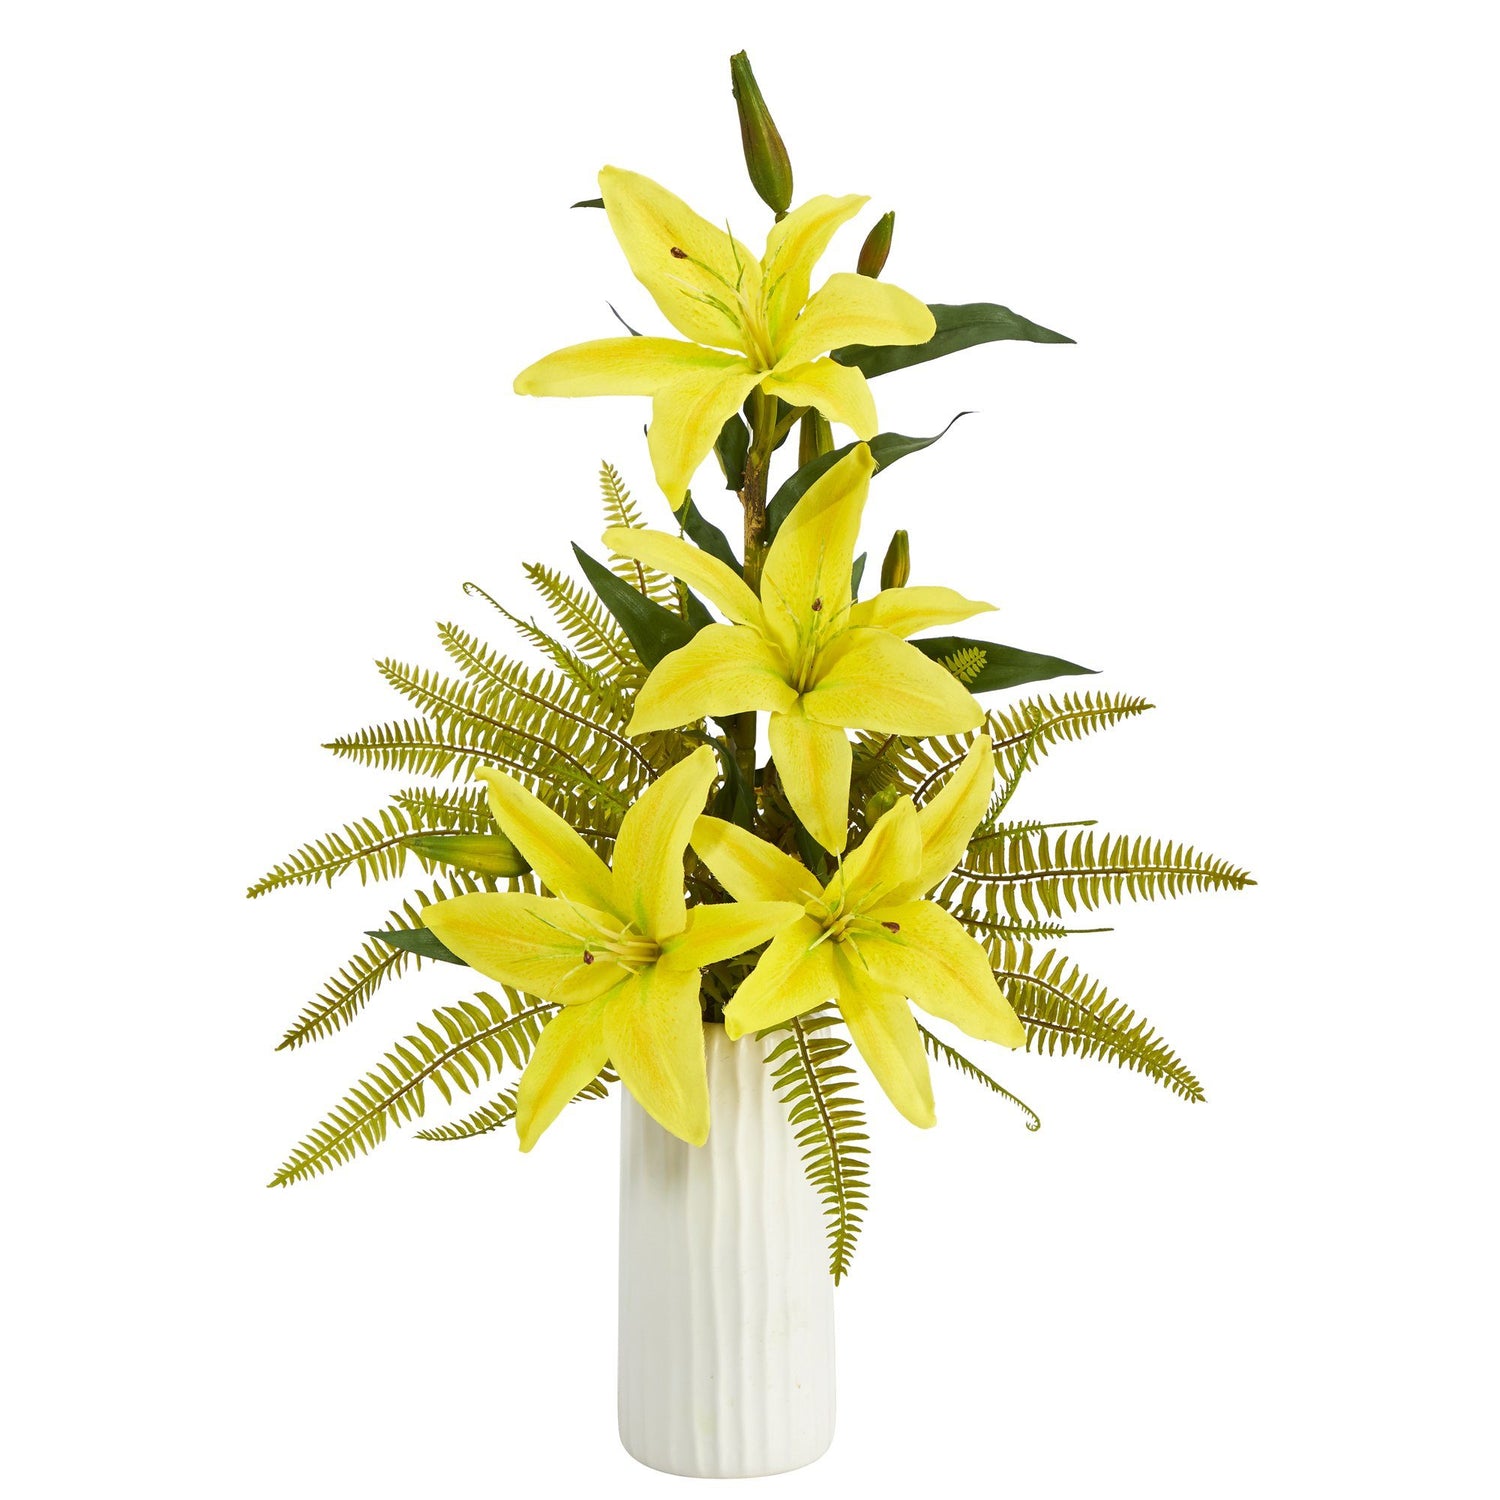 22” Lily and Fern Artificial Arrangement in White Vase